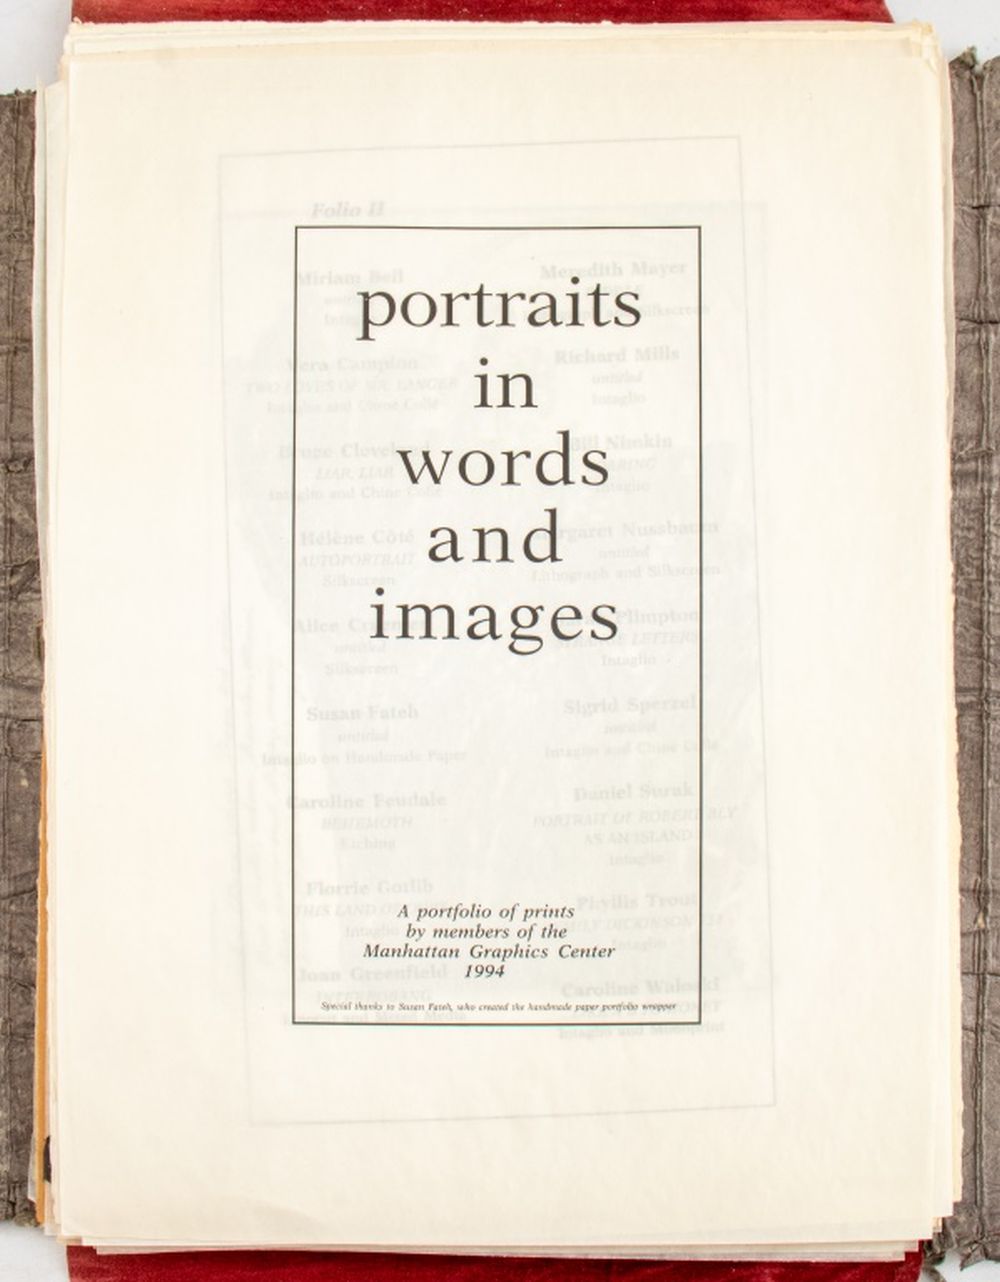 "PORTRAITS IN WORDS AND IMAGES"